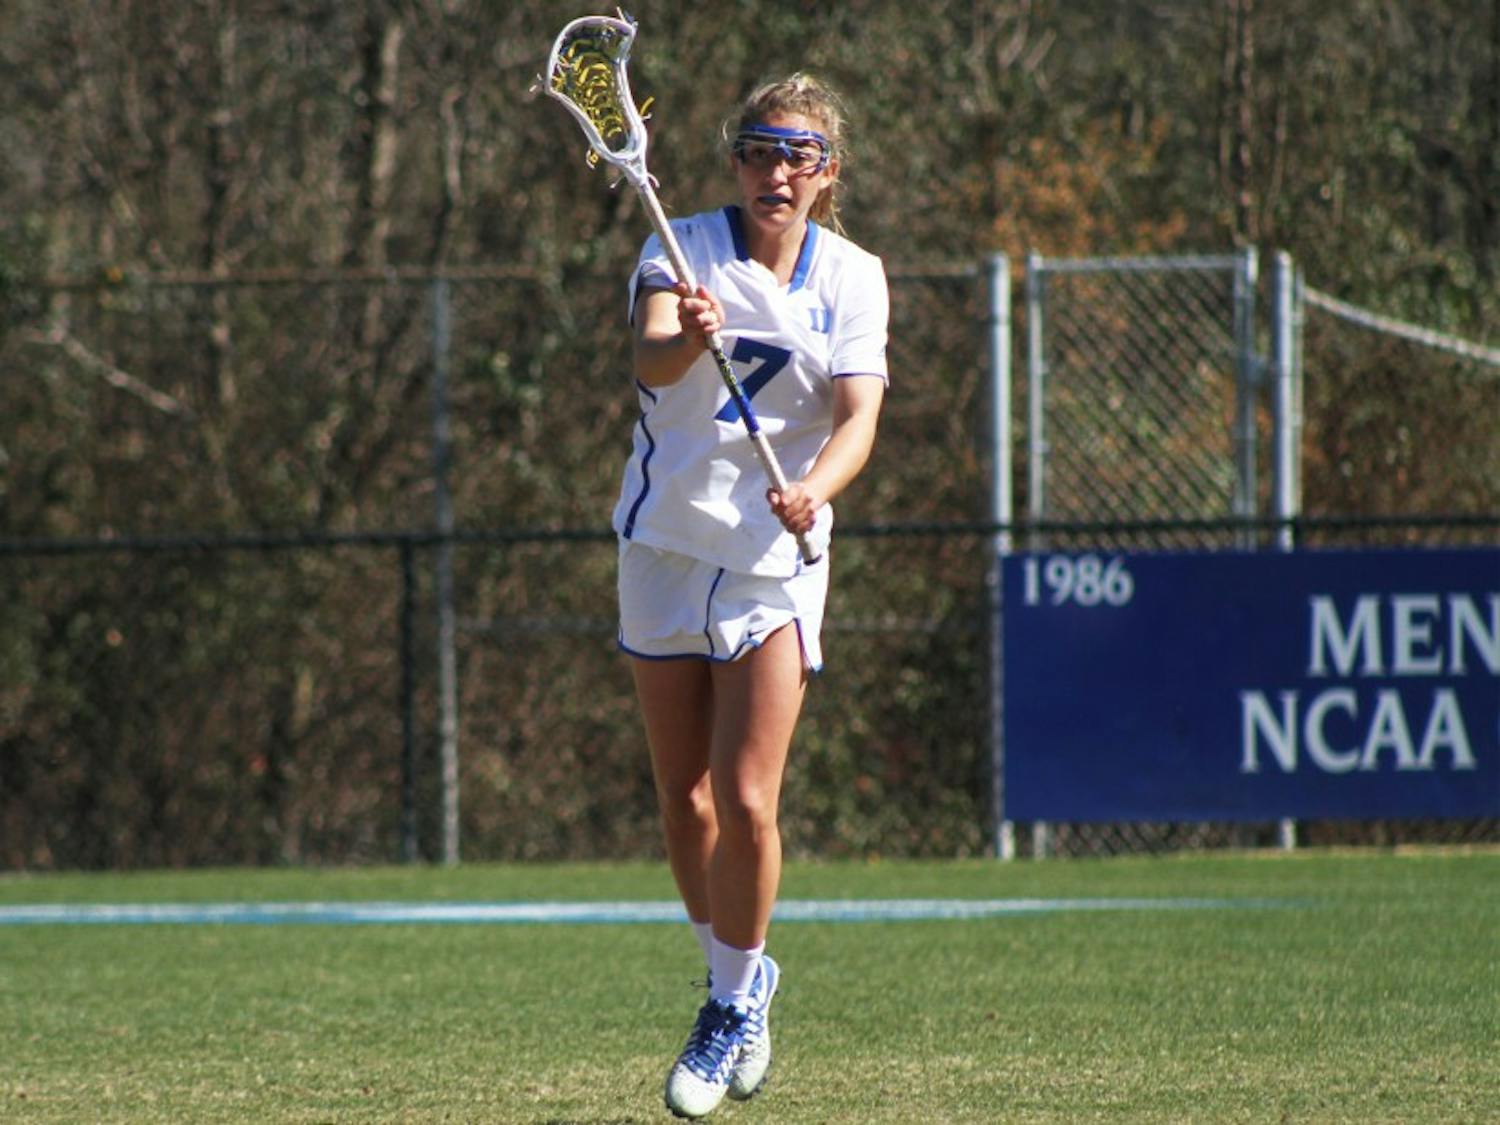 Senior Maddy Acton scored a career-high six goals Sunday, but the Blue Devils could not dig out of an 11-5 halftime deficit against No. 4 Syracuse.